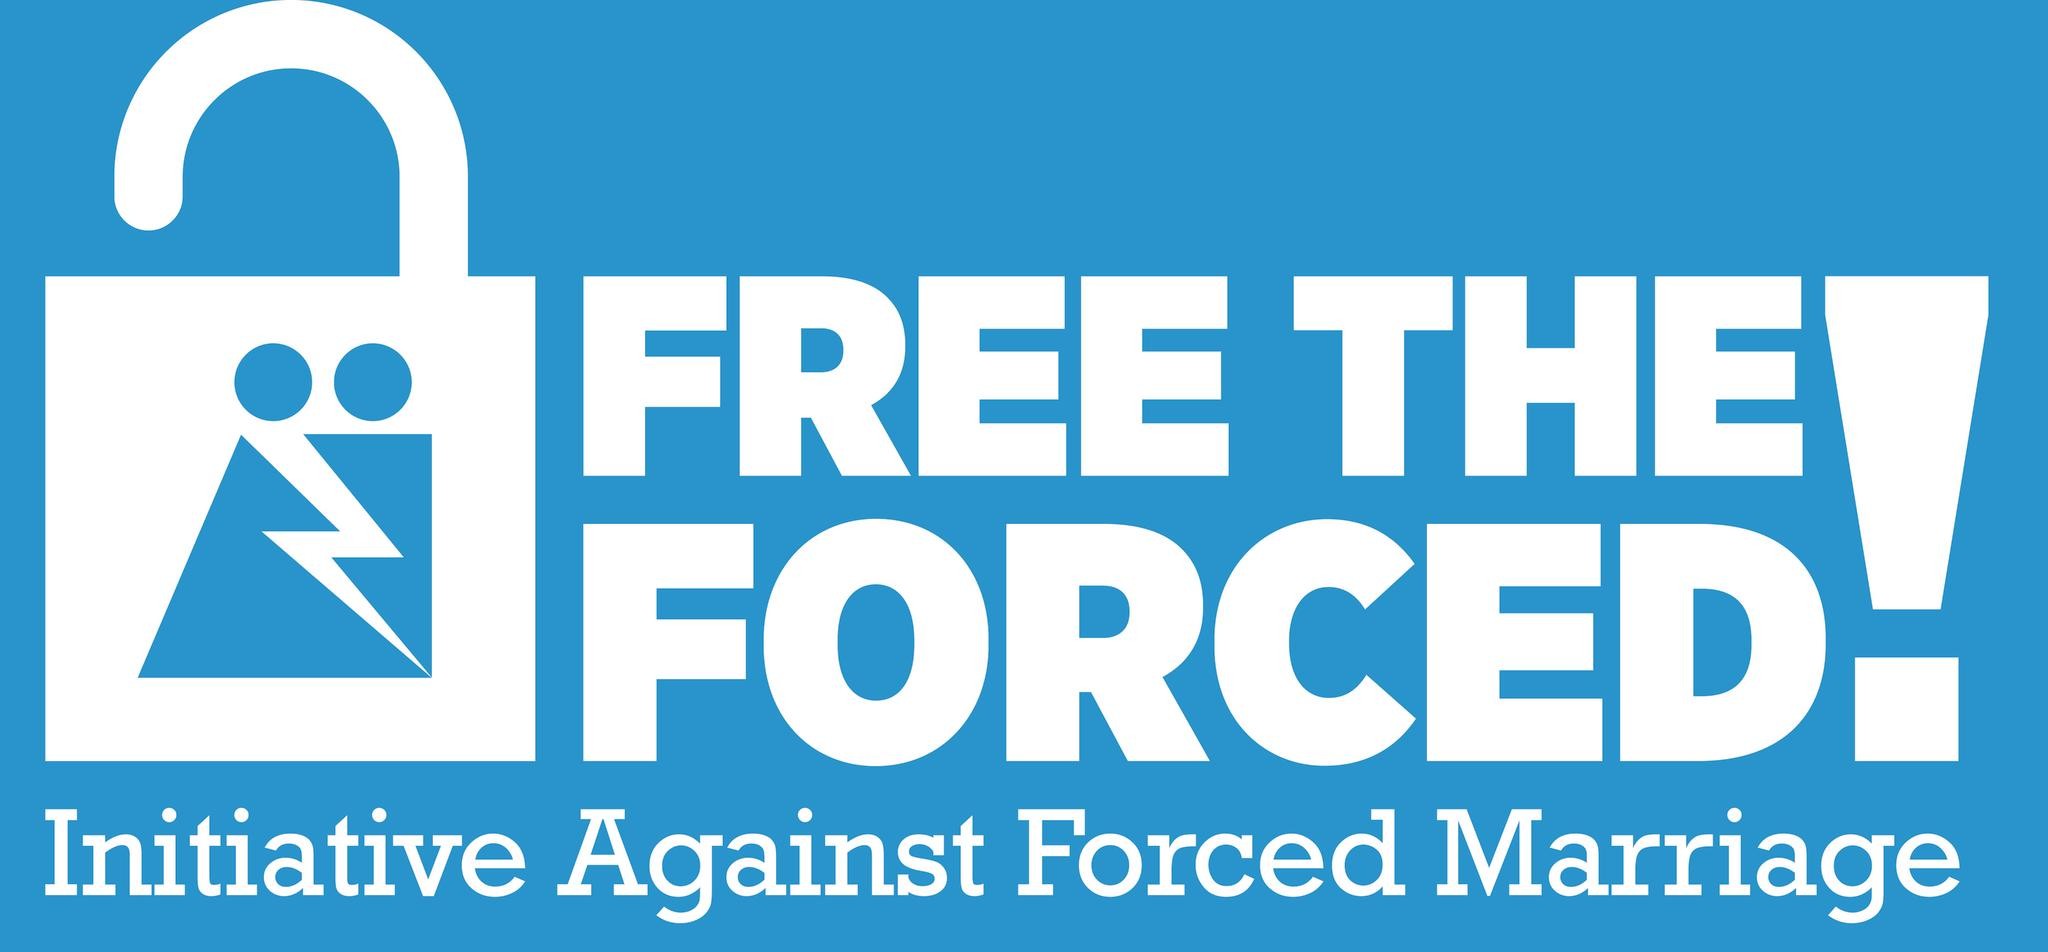 UNITED NATIONS CAMPAIGN AGAINST FORCED MARRIAGE